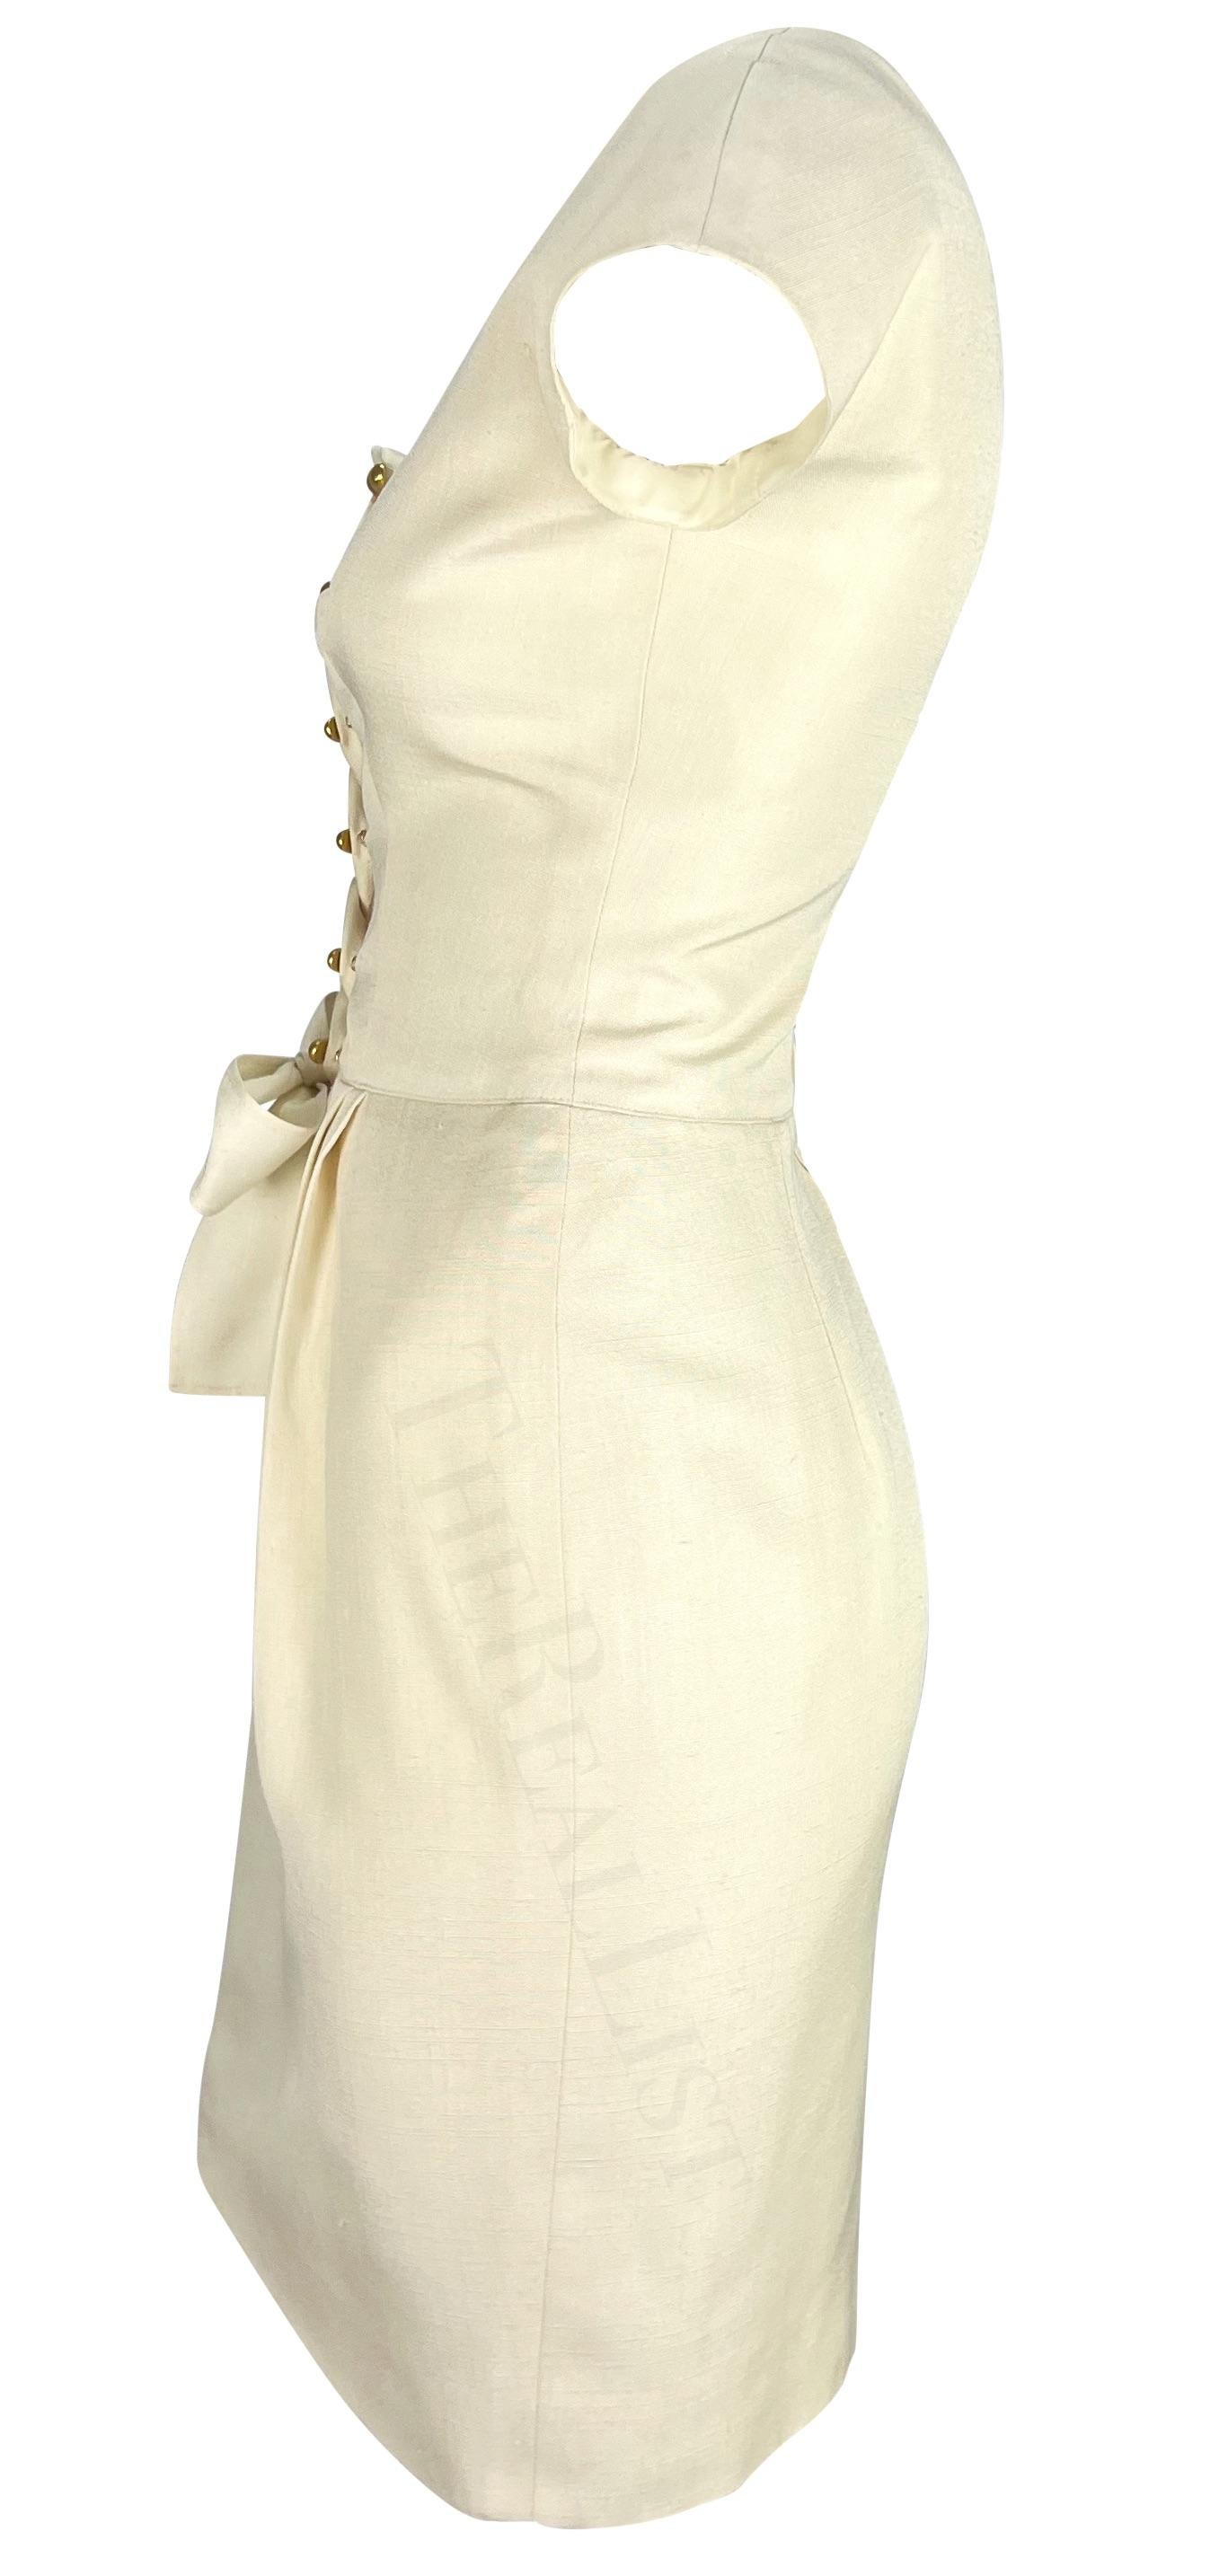 S/S 1995 Valentino Garavani Creme Corset Lace-Up Petal Sleeve Midi Dress In Good Condition For Sale In West Hollywood, CA